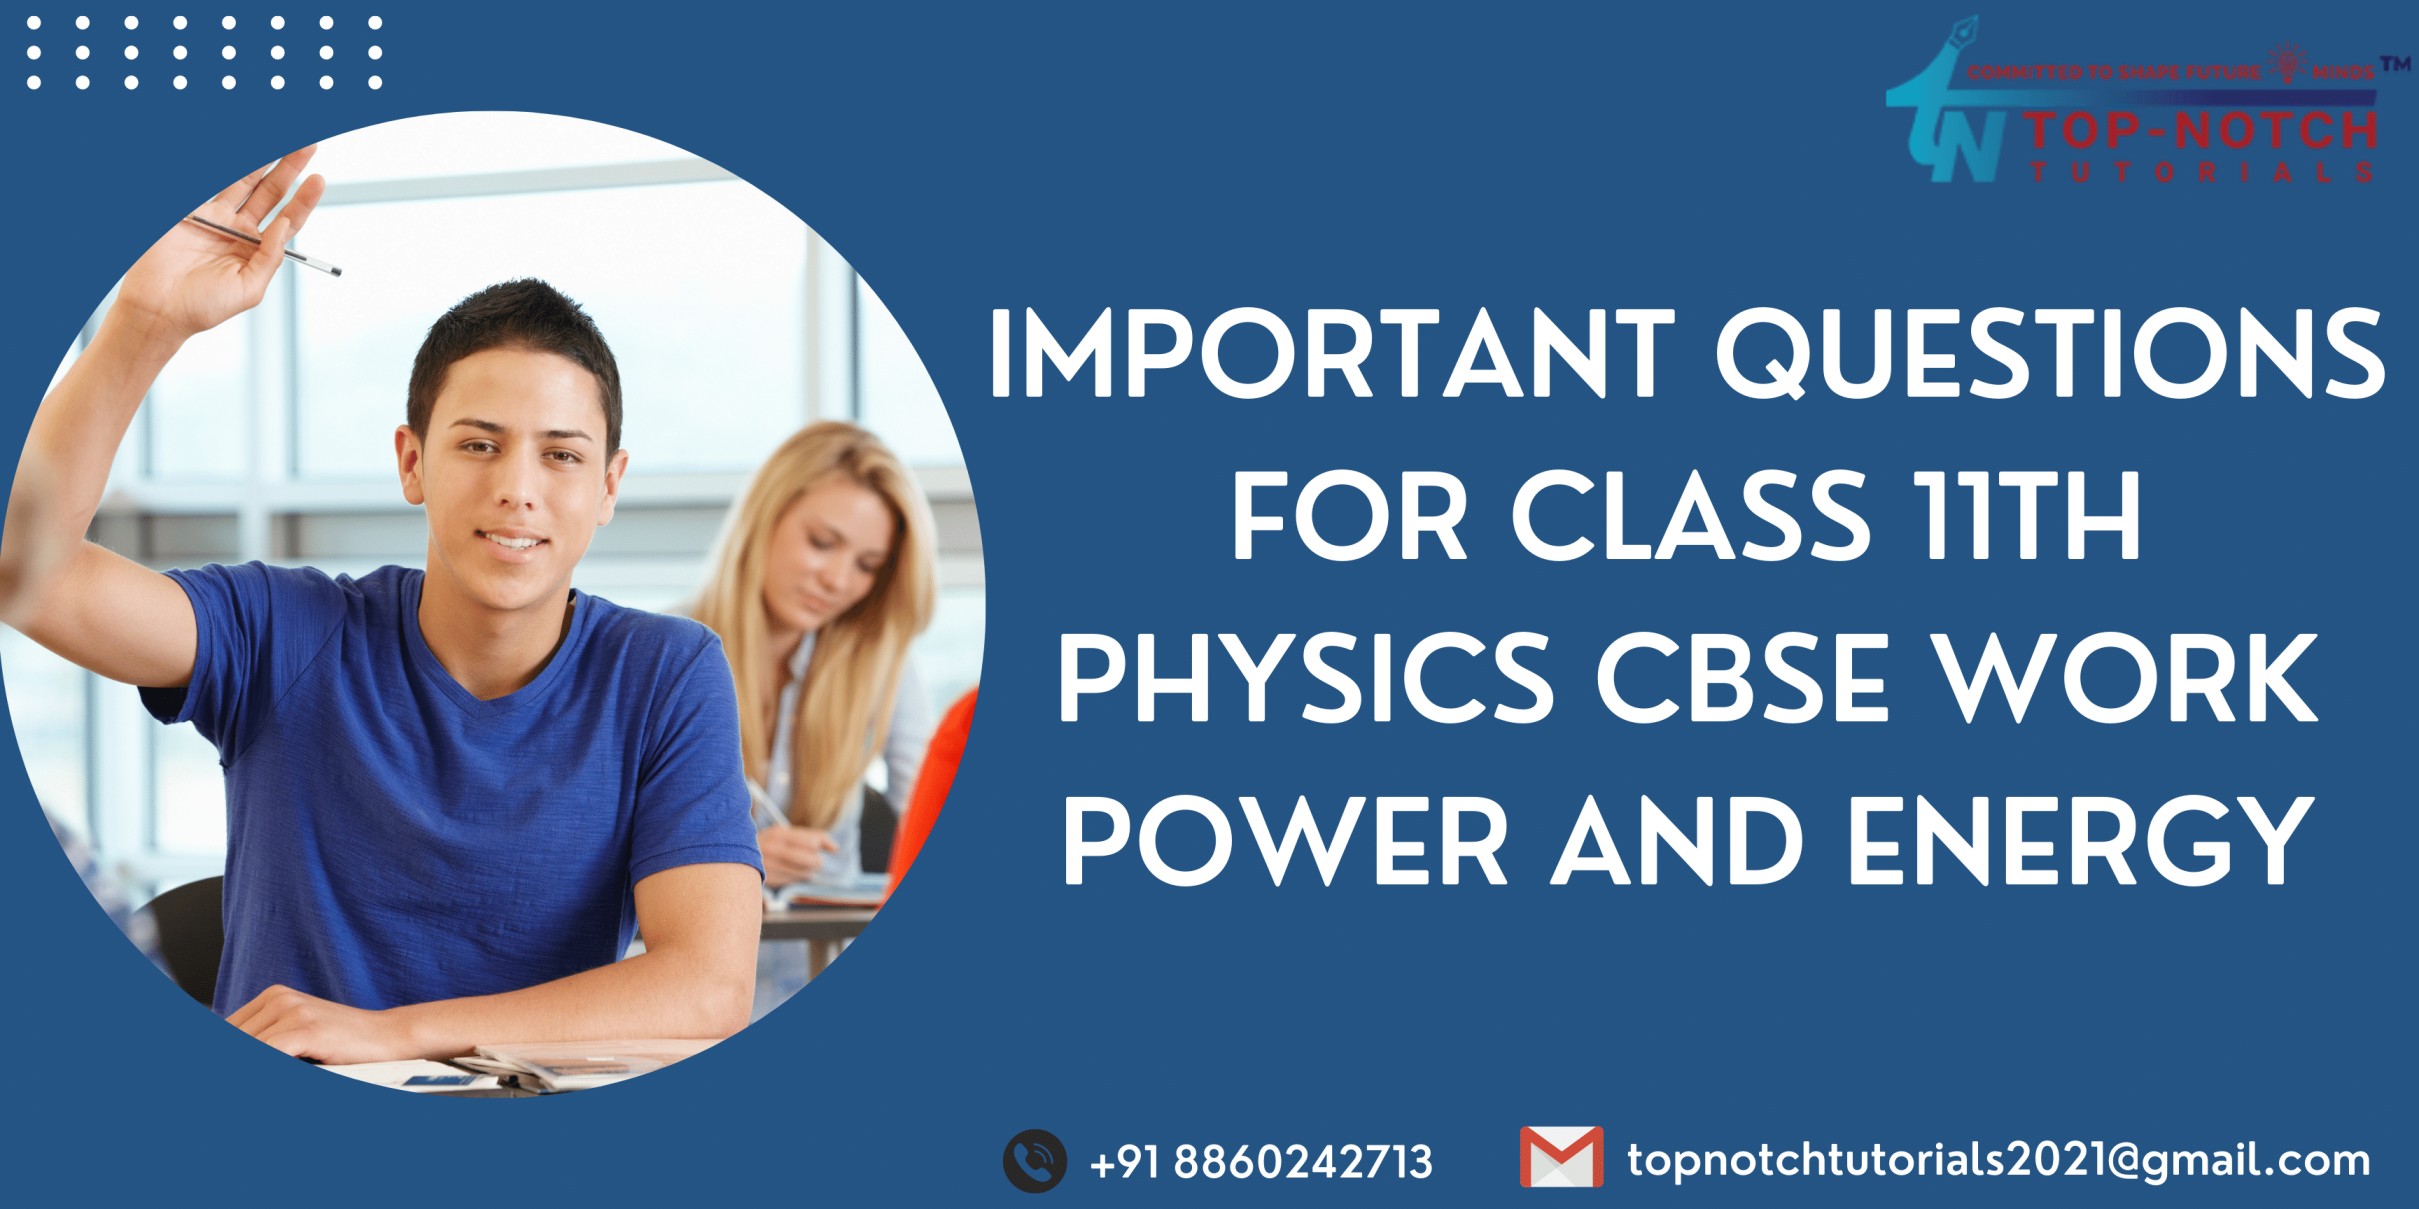 Important Questions for Class 11th Physics CBSE Work Power and Energy